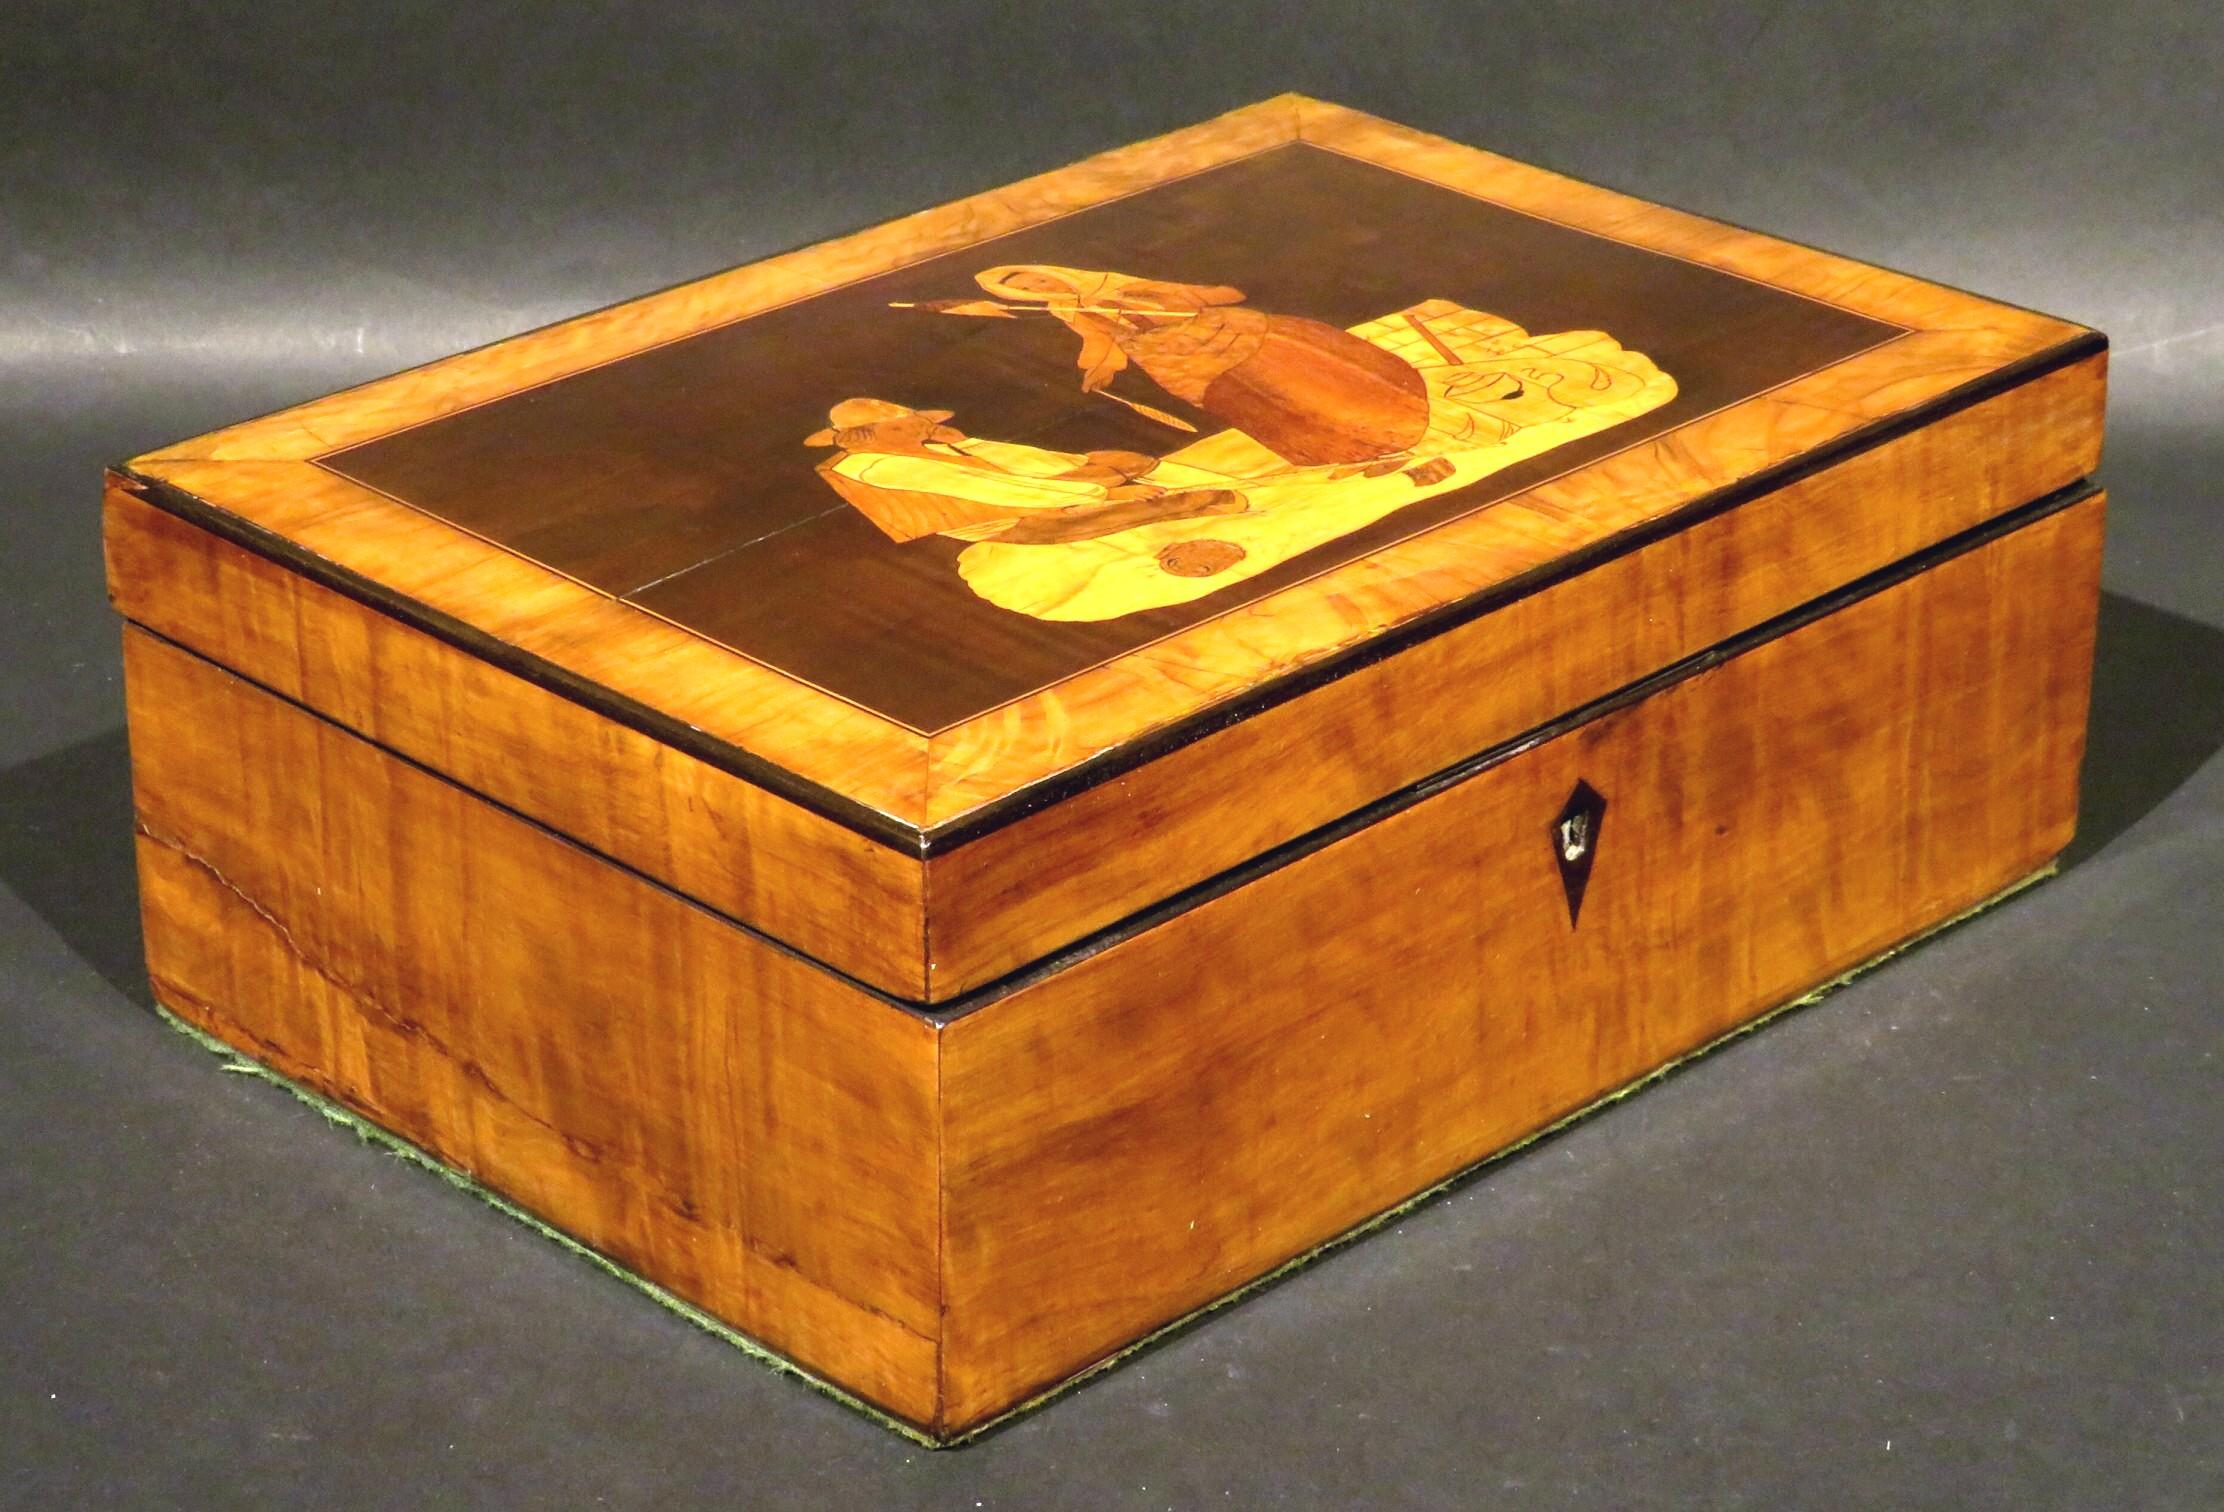 A charming 19th century Sorrento marquetry jewelry box or trinket box, the hinged lid illustrating a marquetry vignette depicting a young peasant couple - the young man shown seated while daydreaming, the young woman standing next to him spinning